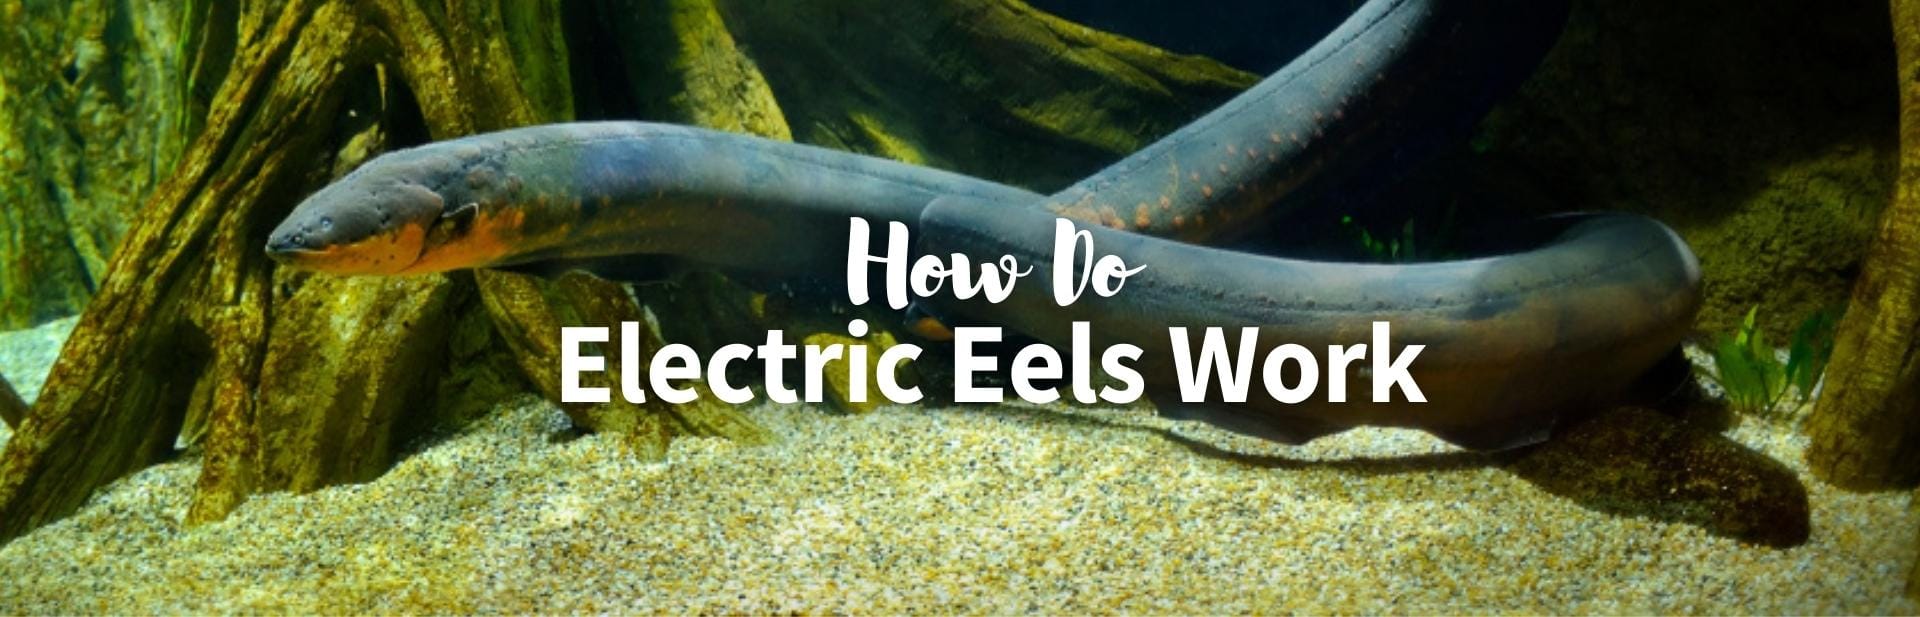 How Do Electric Eels Work? All About The Fish That Will Shock You